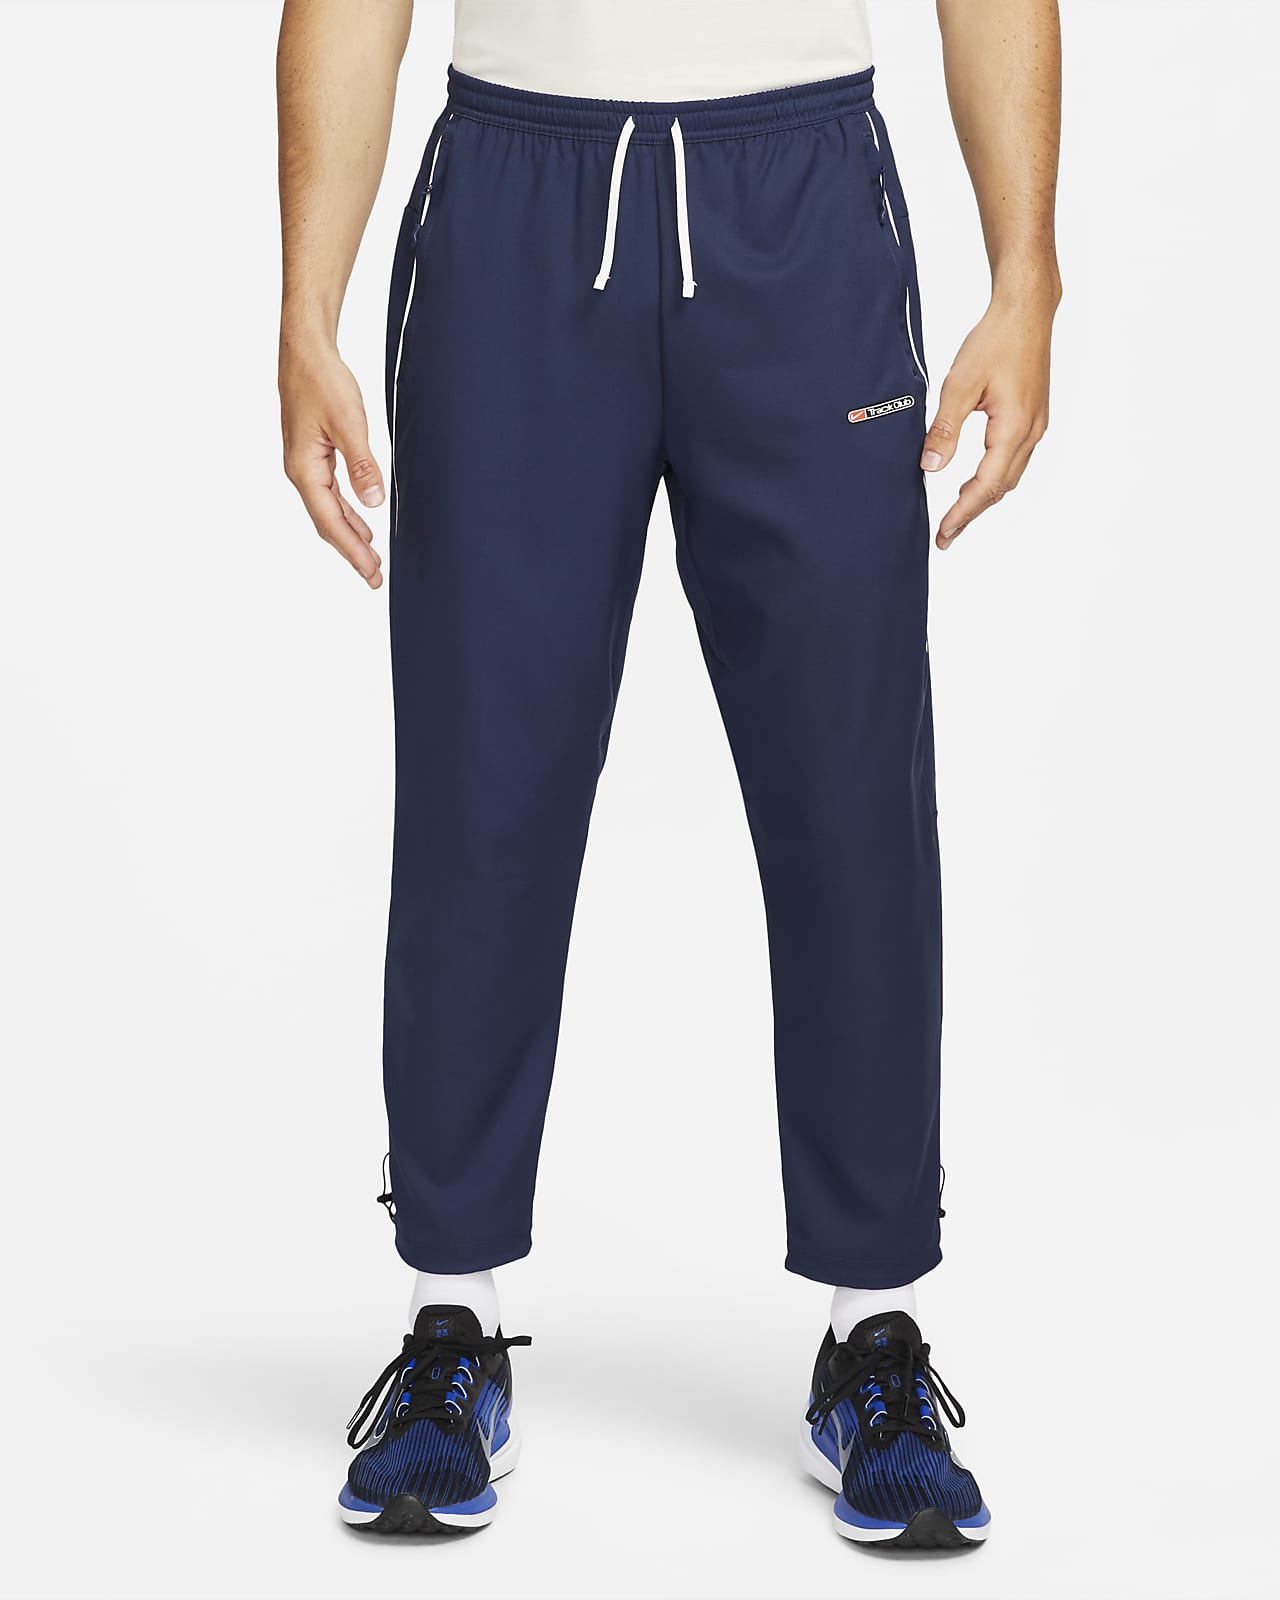 Nike Challenger Track Club Men's Dri-FIT Running Trousers